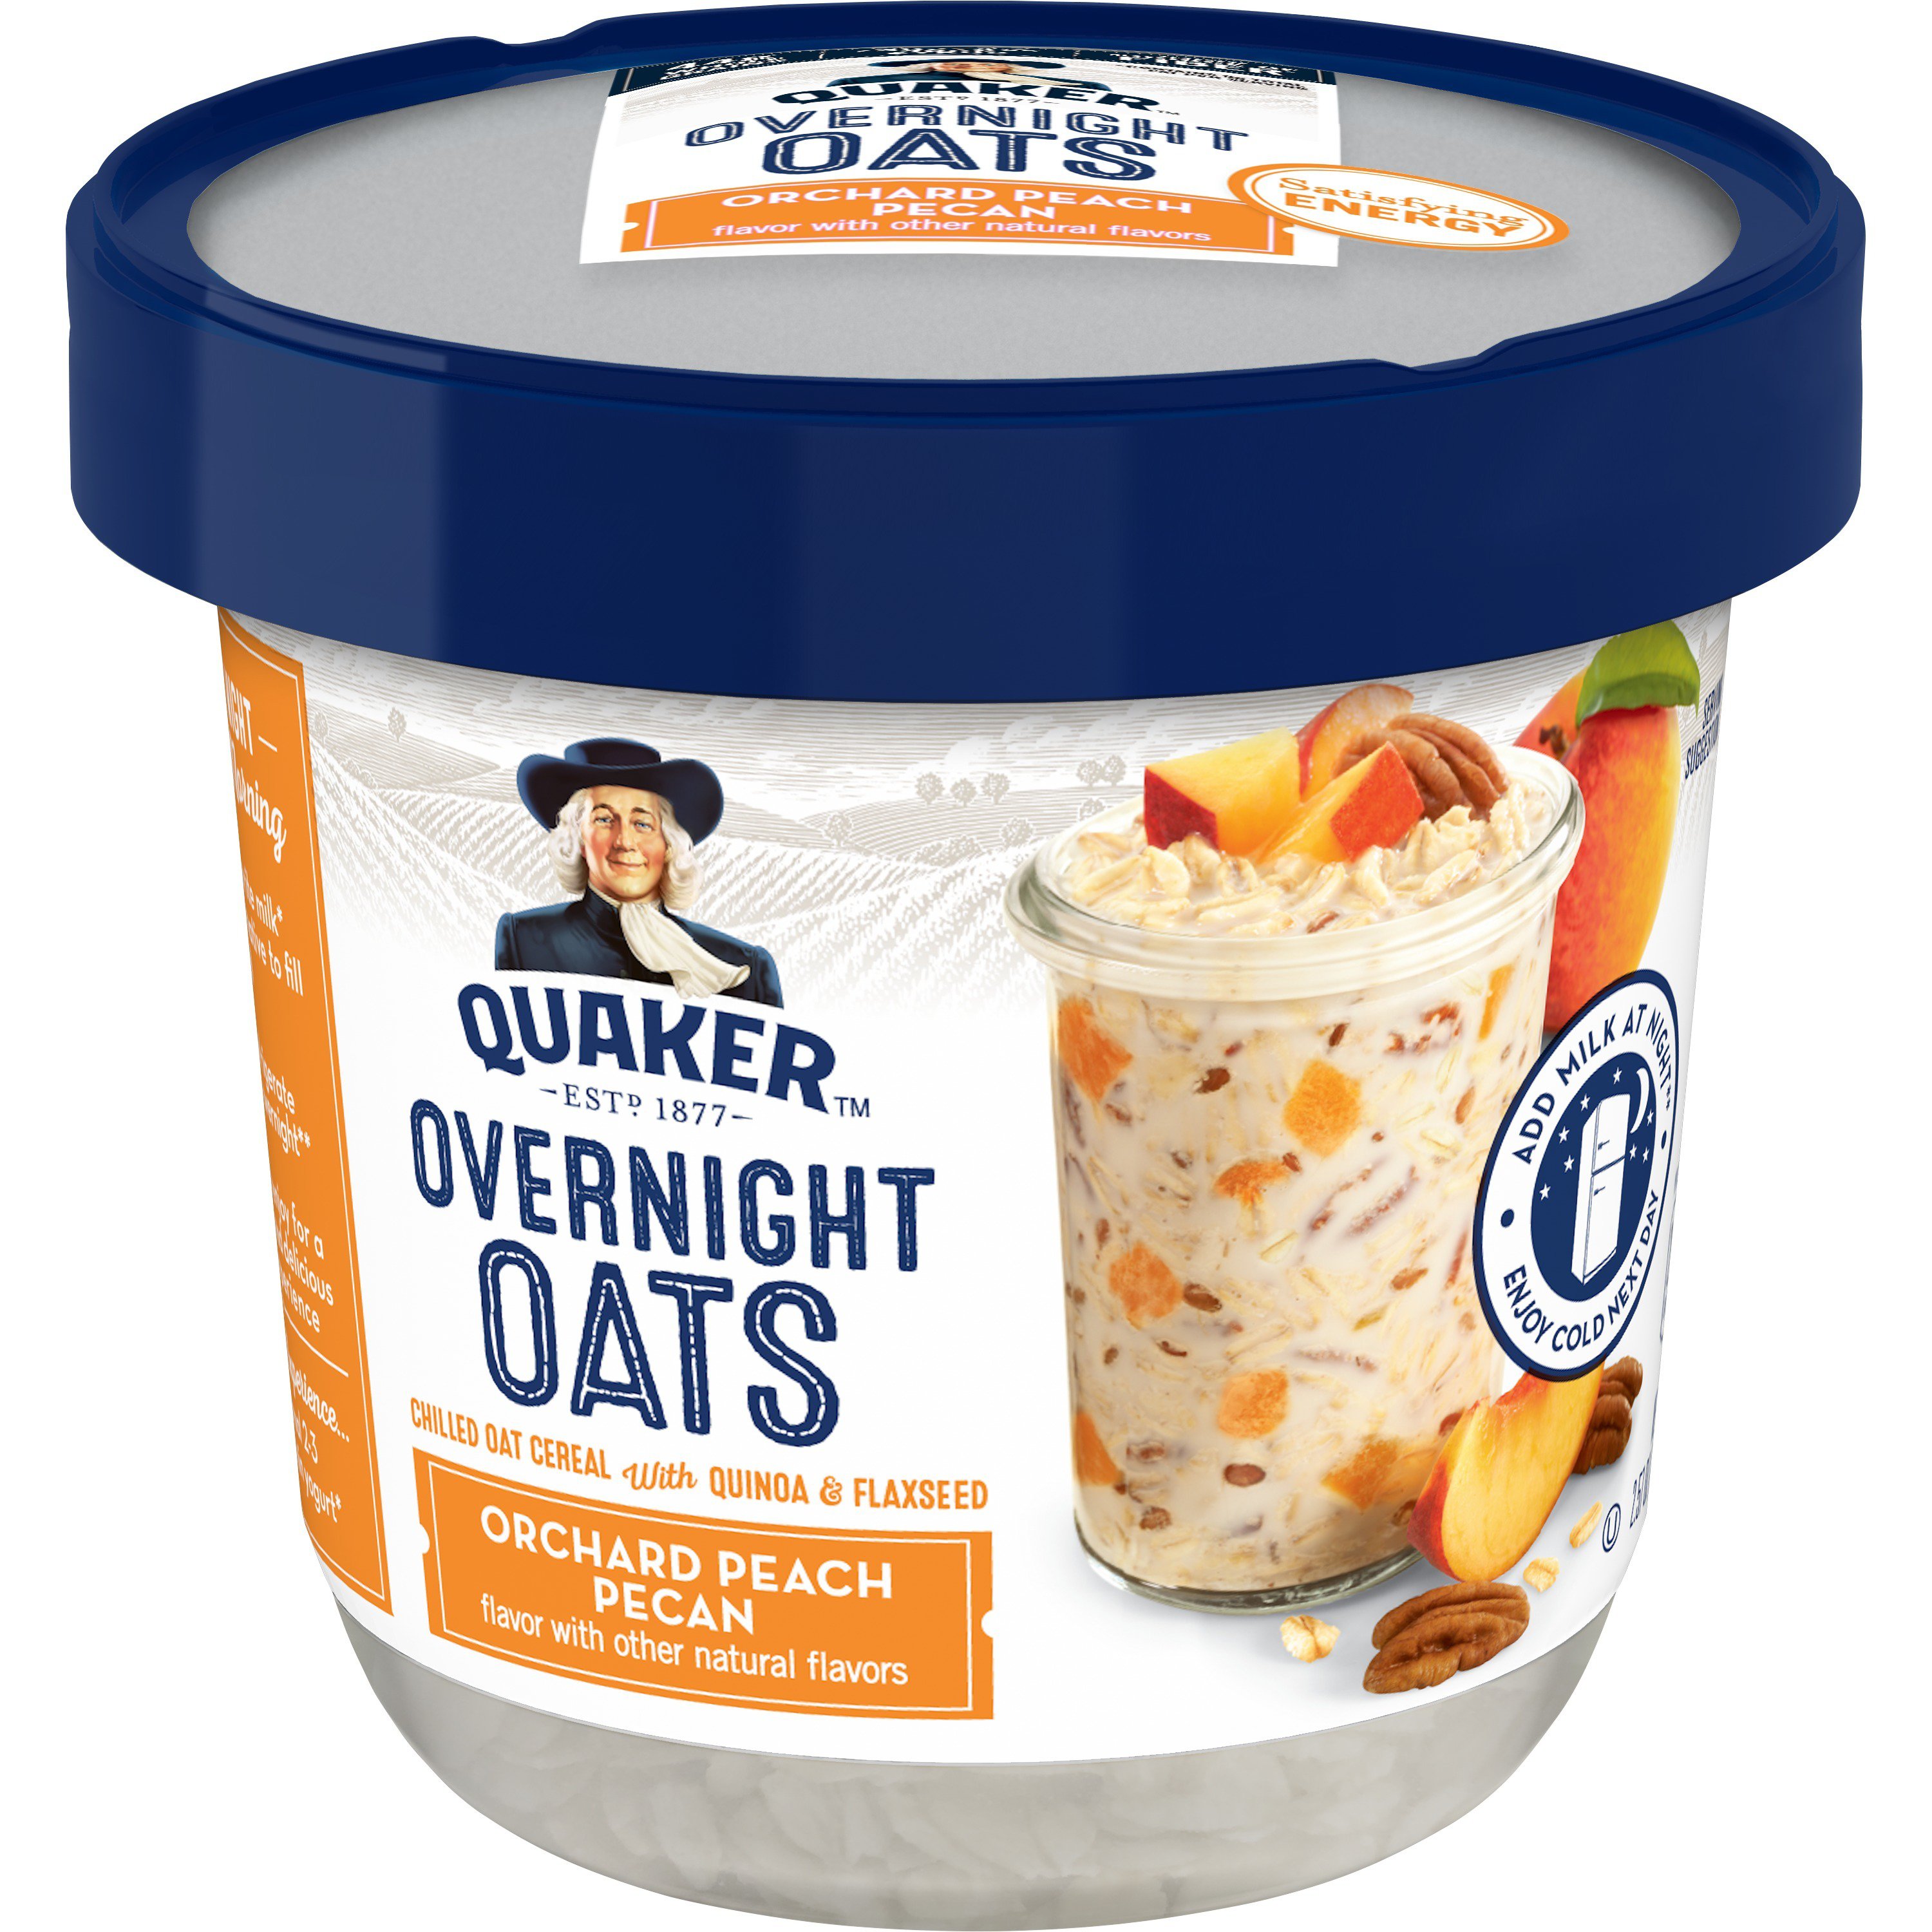 Quaker Overnight Oats Orchard Peach Pecan Perfection Cup - Shop Oatmeal